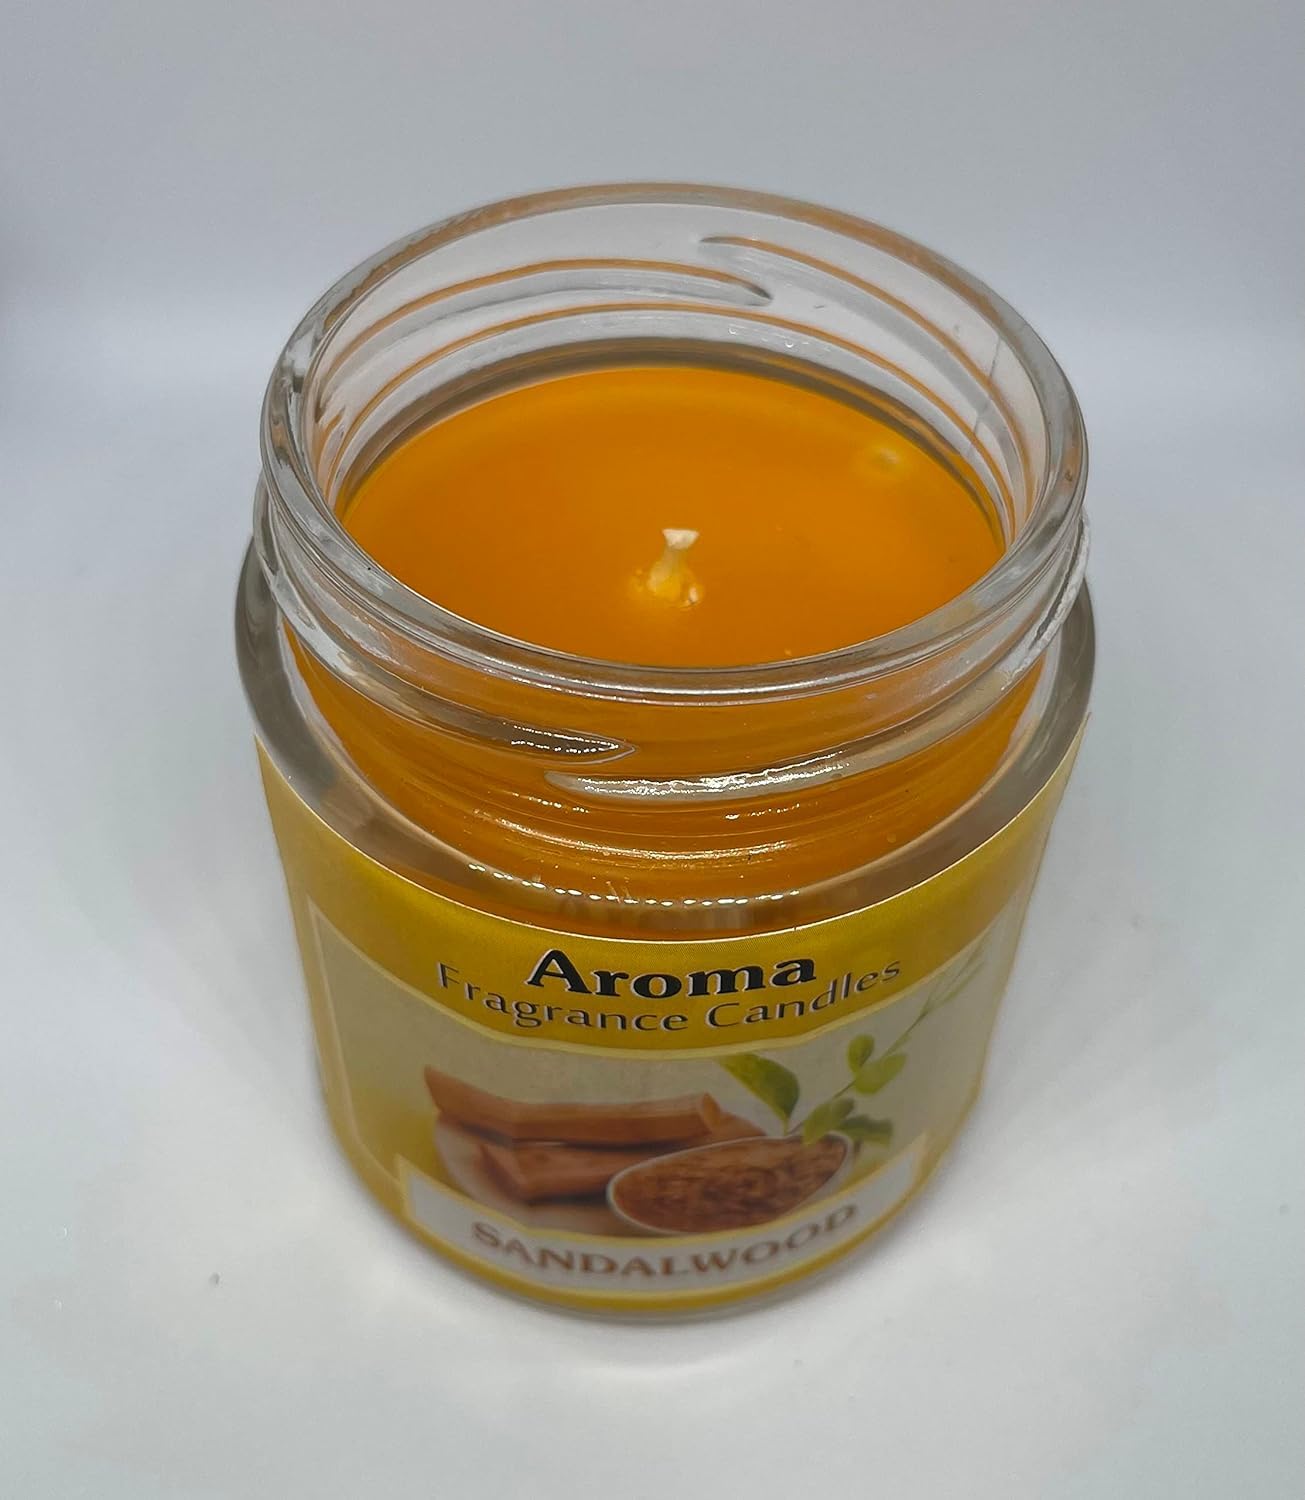 Pujahome andle in Glass Jar I Aromatic Smokeless Wax Candle I Fragrance Candle Long Hour Burning up to 35hrs (Sandal)